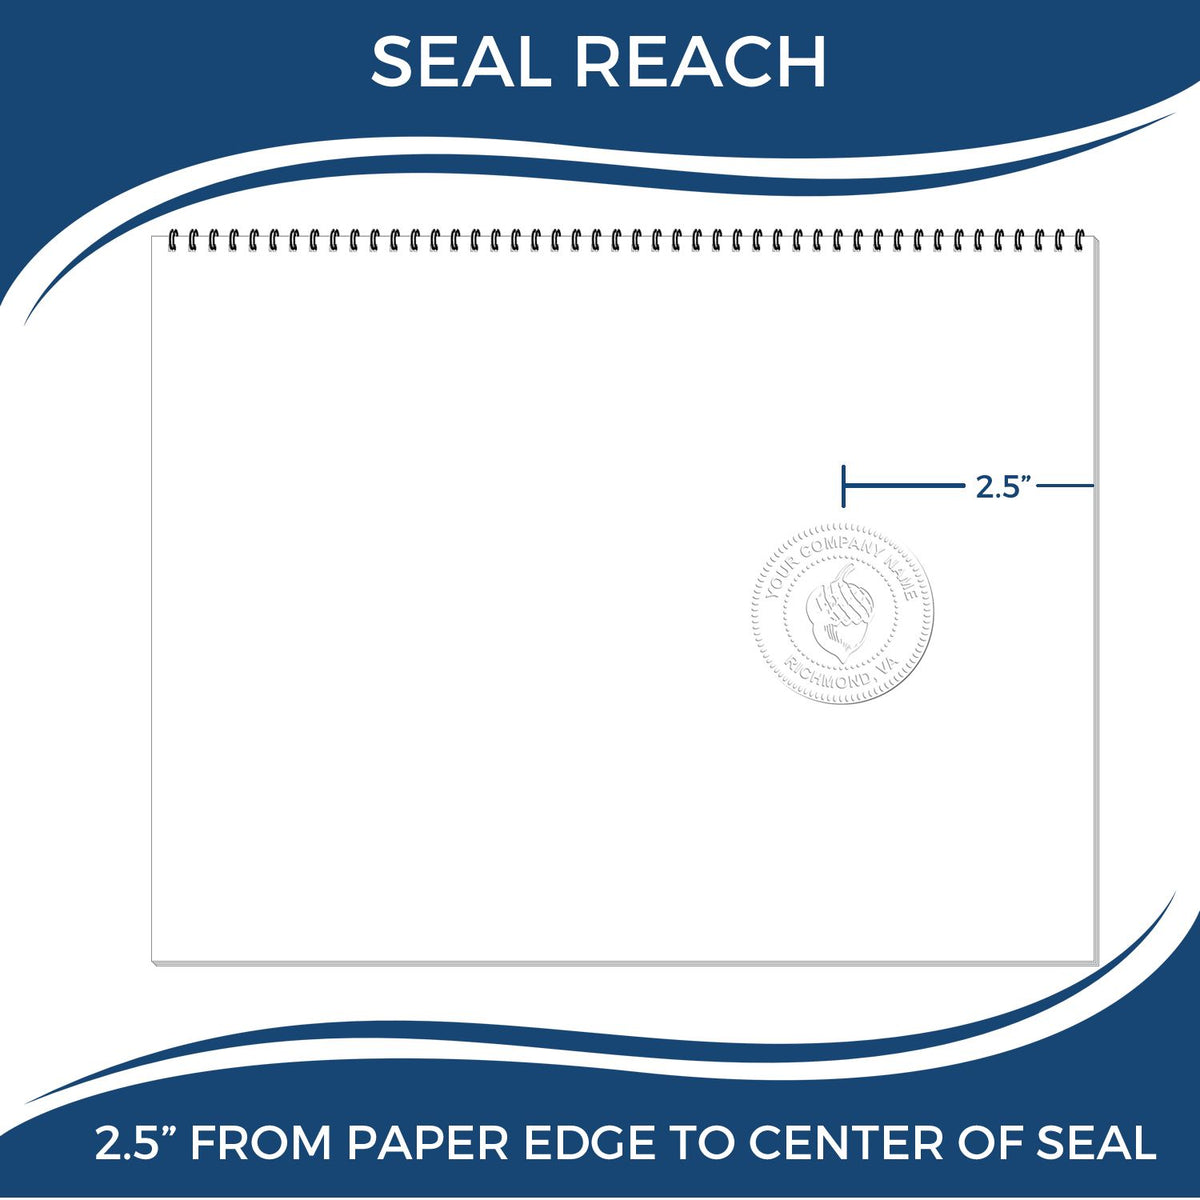 An infographic showing the seal reach which is represented by a ruler and a miniature seal image of the Long Reach Iowa Geology Seal